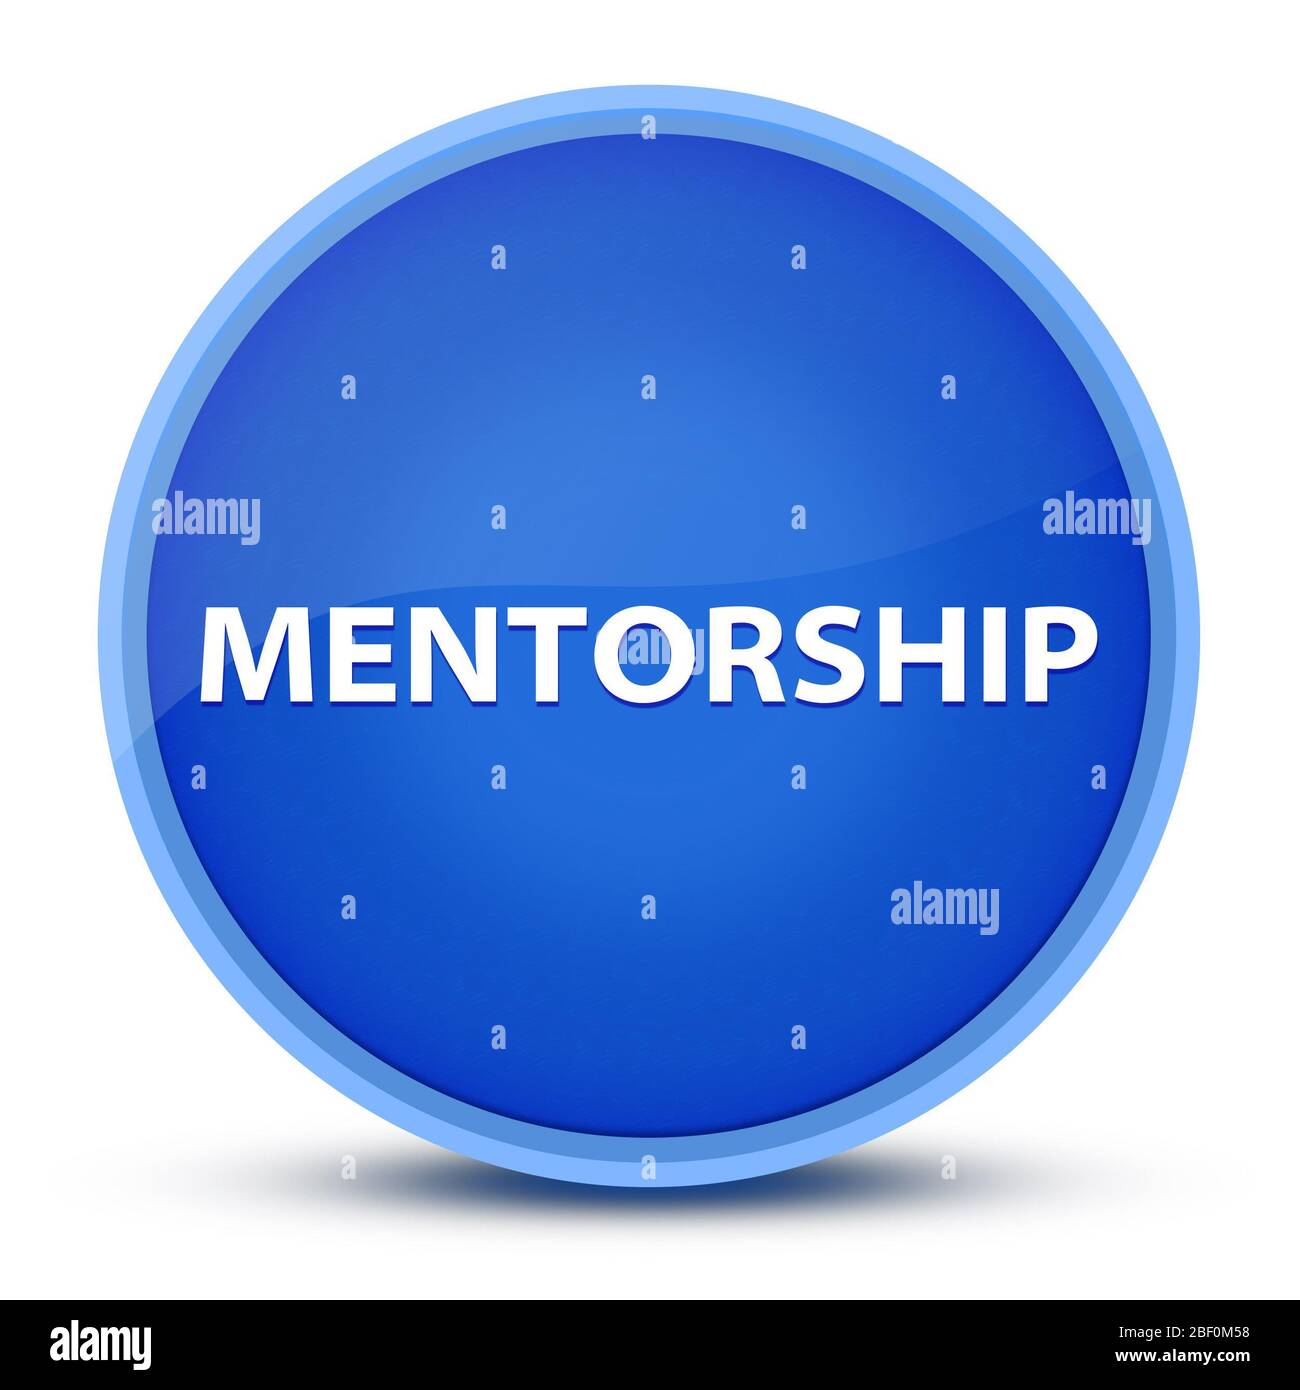 Mentorship isolated on special blue round button abstract illustration Stock Photo